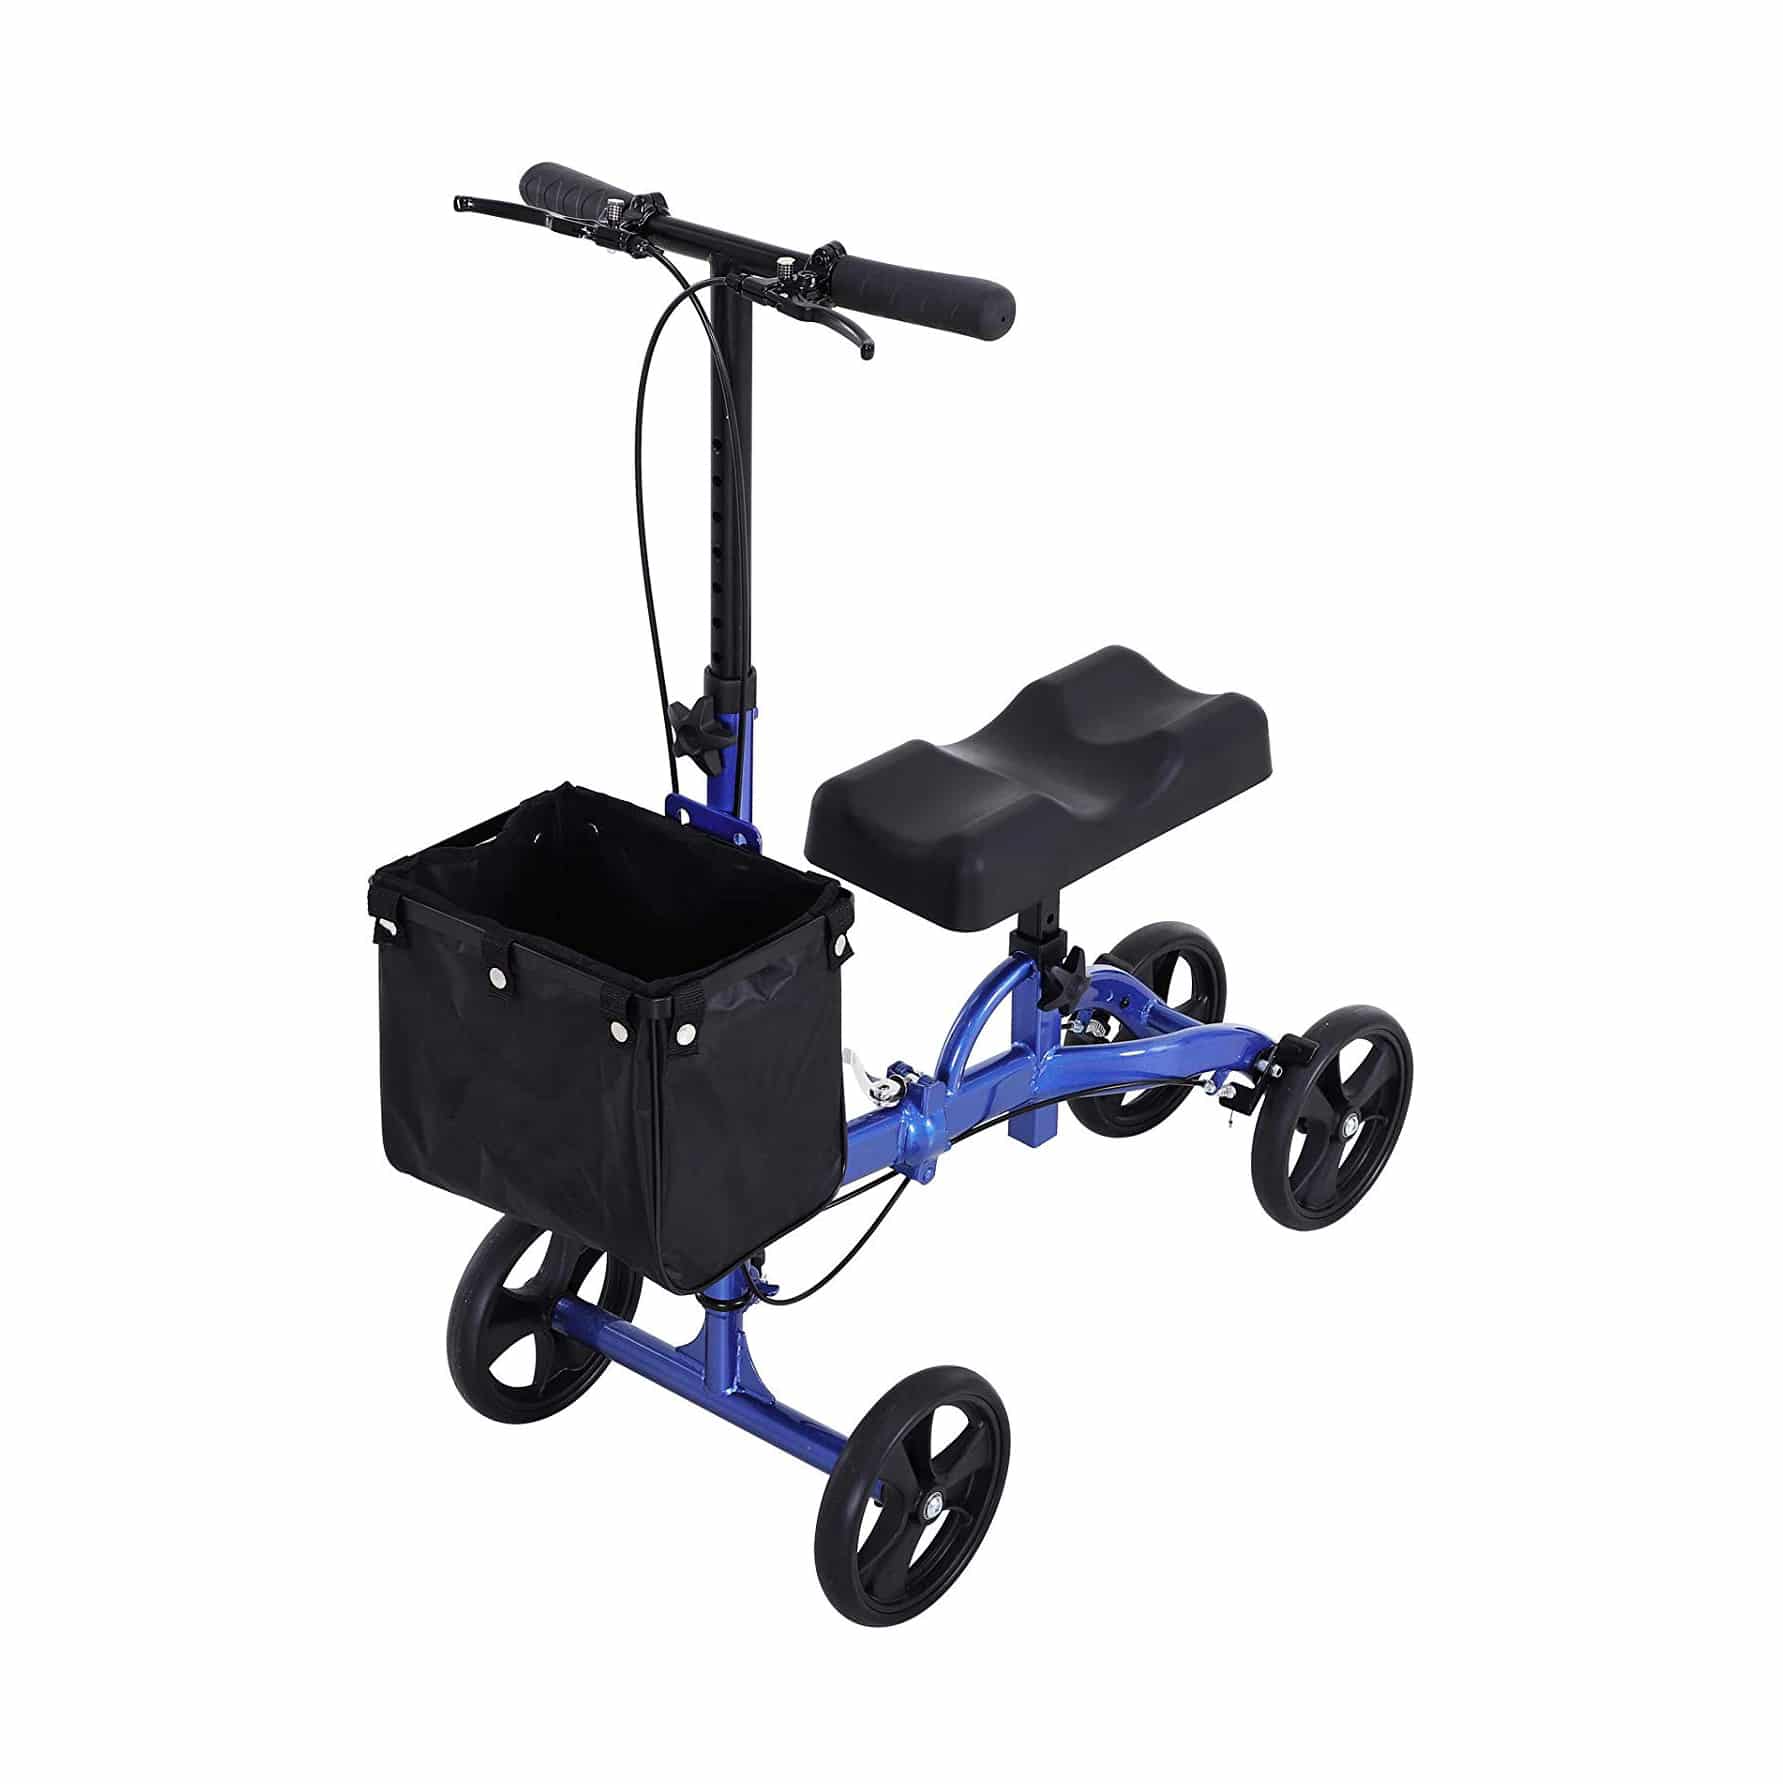 Top 10 Best Knee Scooters in 2020 Reviews | Buyer's Guide